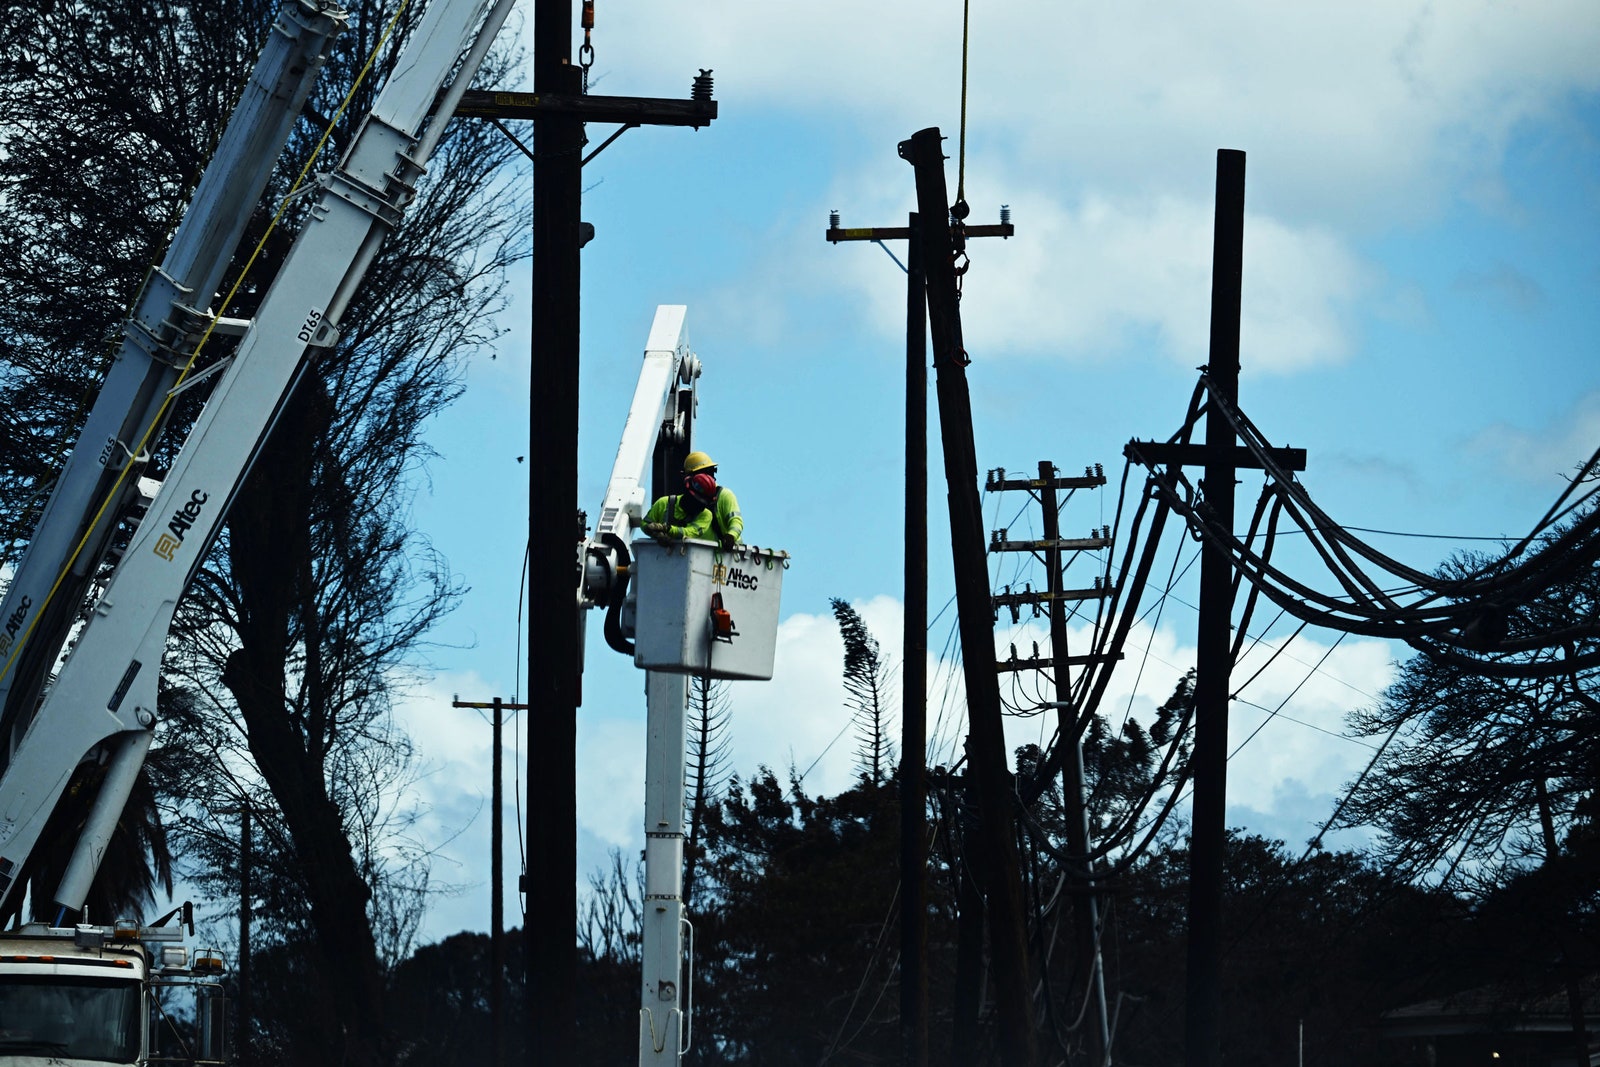 Burying Power Lines Prevents Wildfires. But There’s a Cost